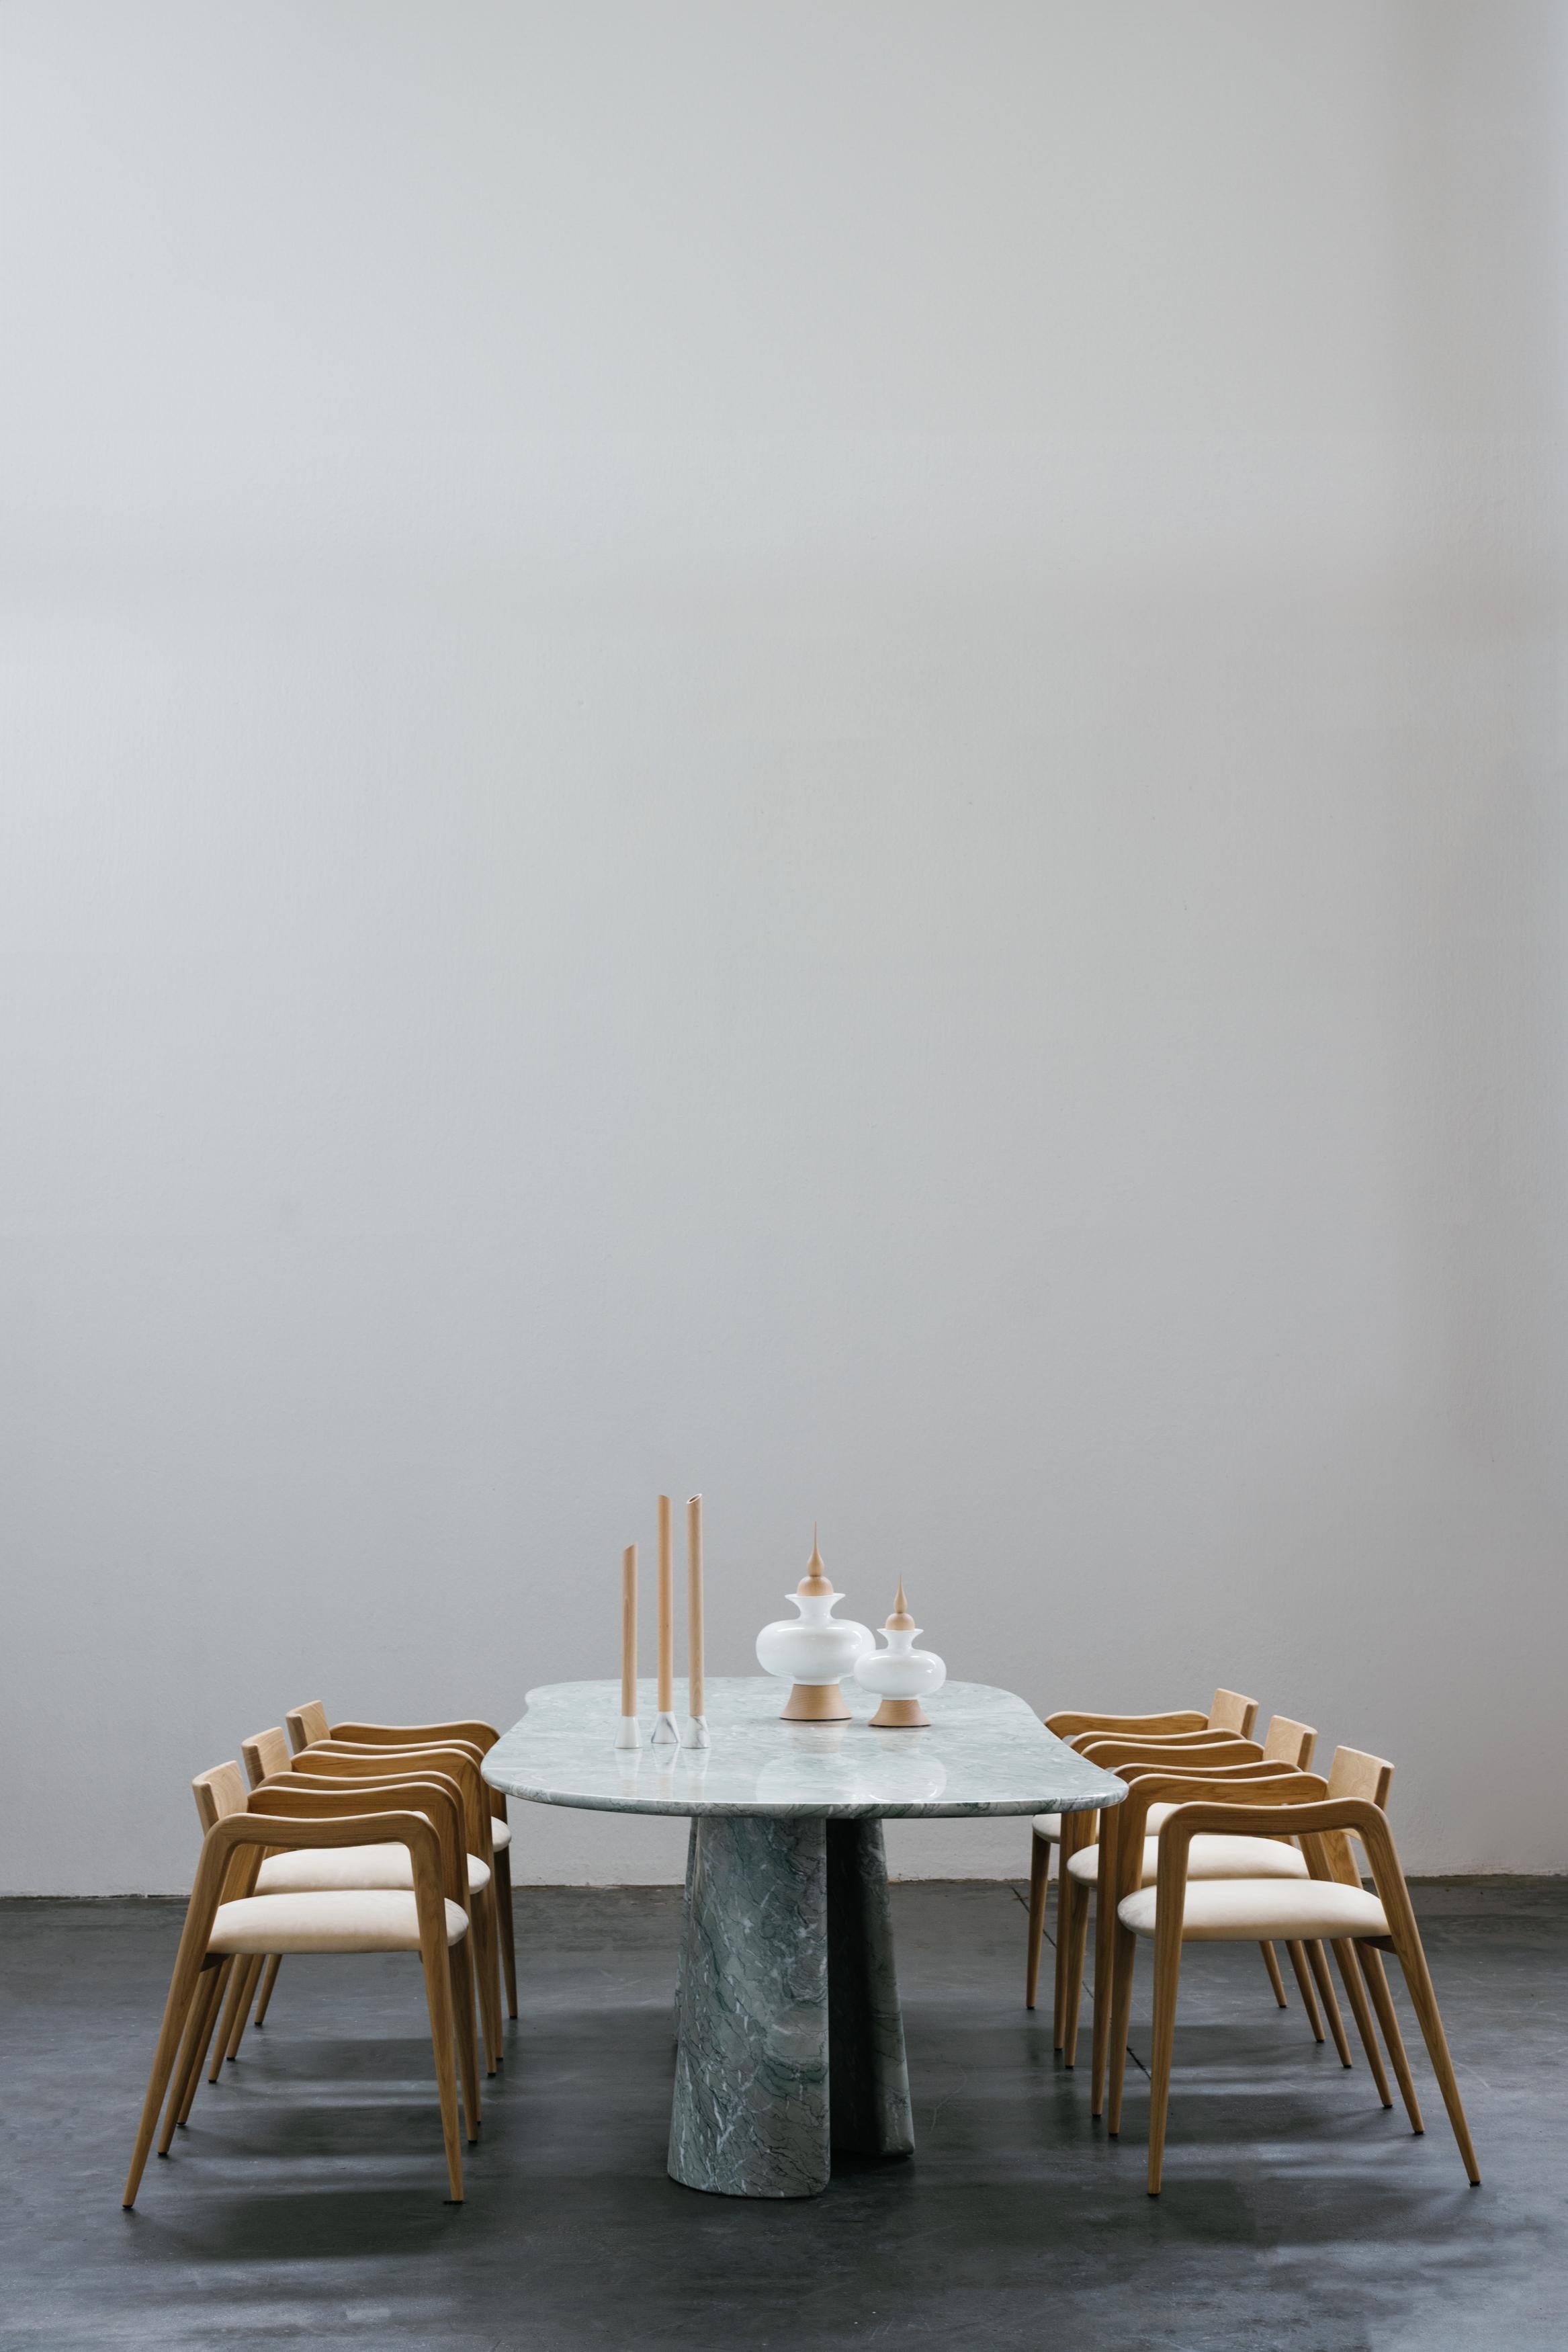 In-Side Dining Table, Contemporary Collection, Handcrafted in Portugal - Europe by Greenapple.

The design of the In-Side dining table was inspired by the geometric shape of a cone, aiming to preserve the sophisticated design and fine craftsmanship